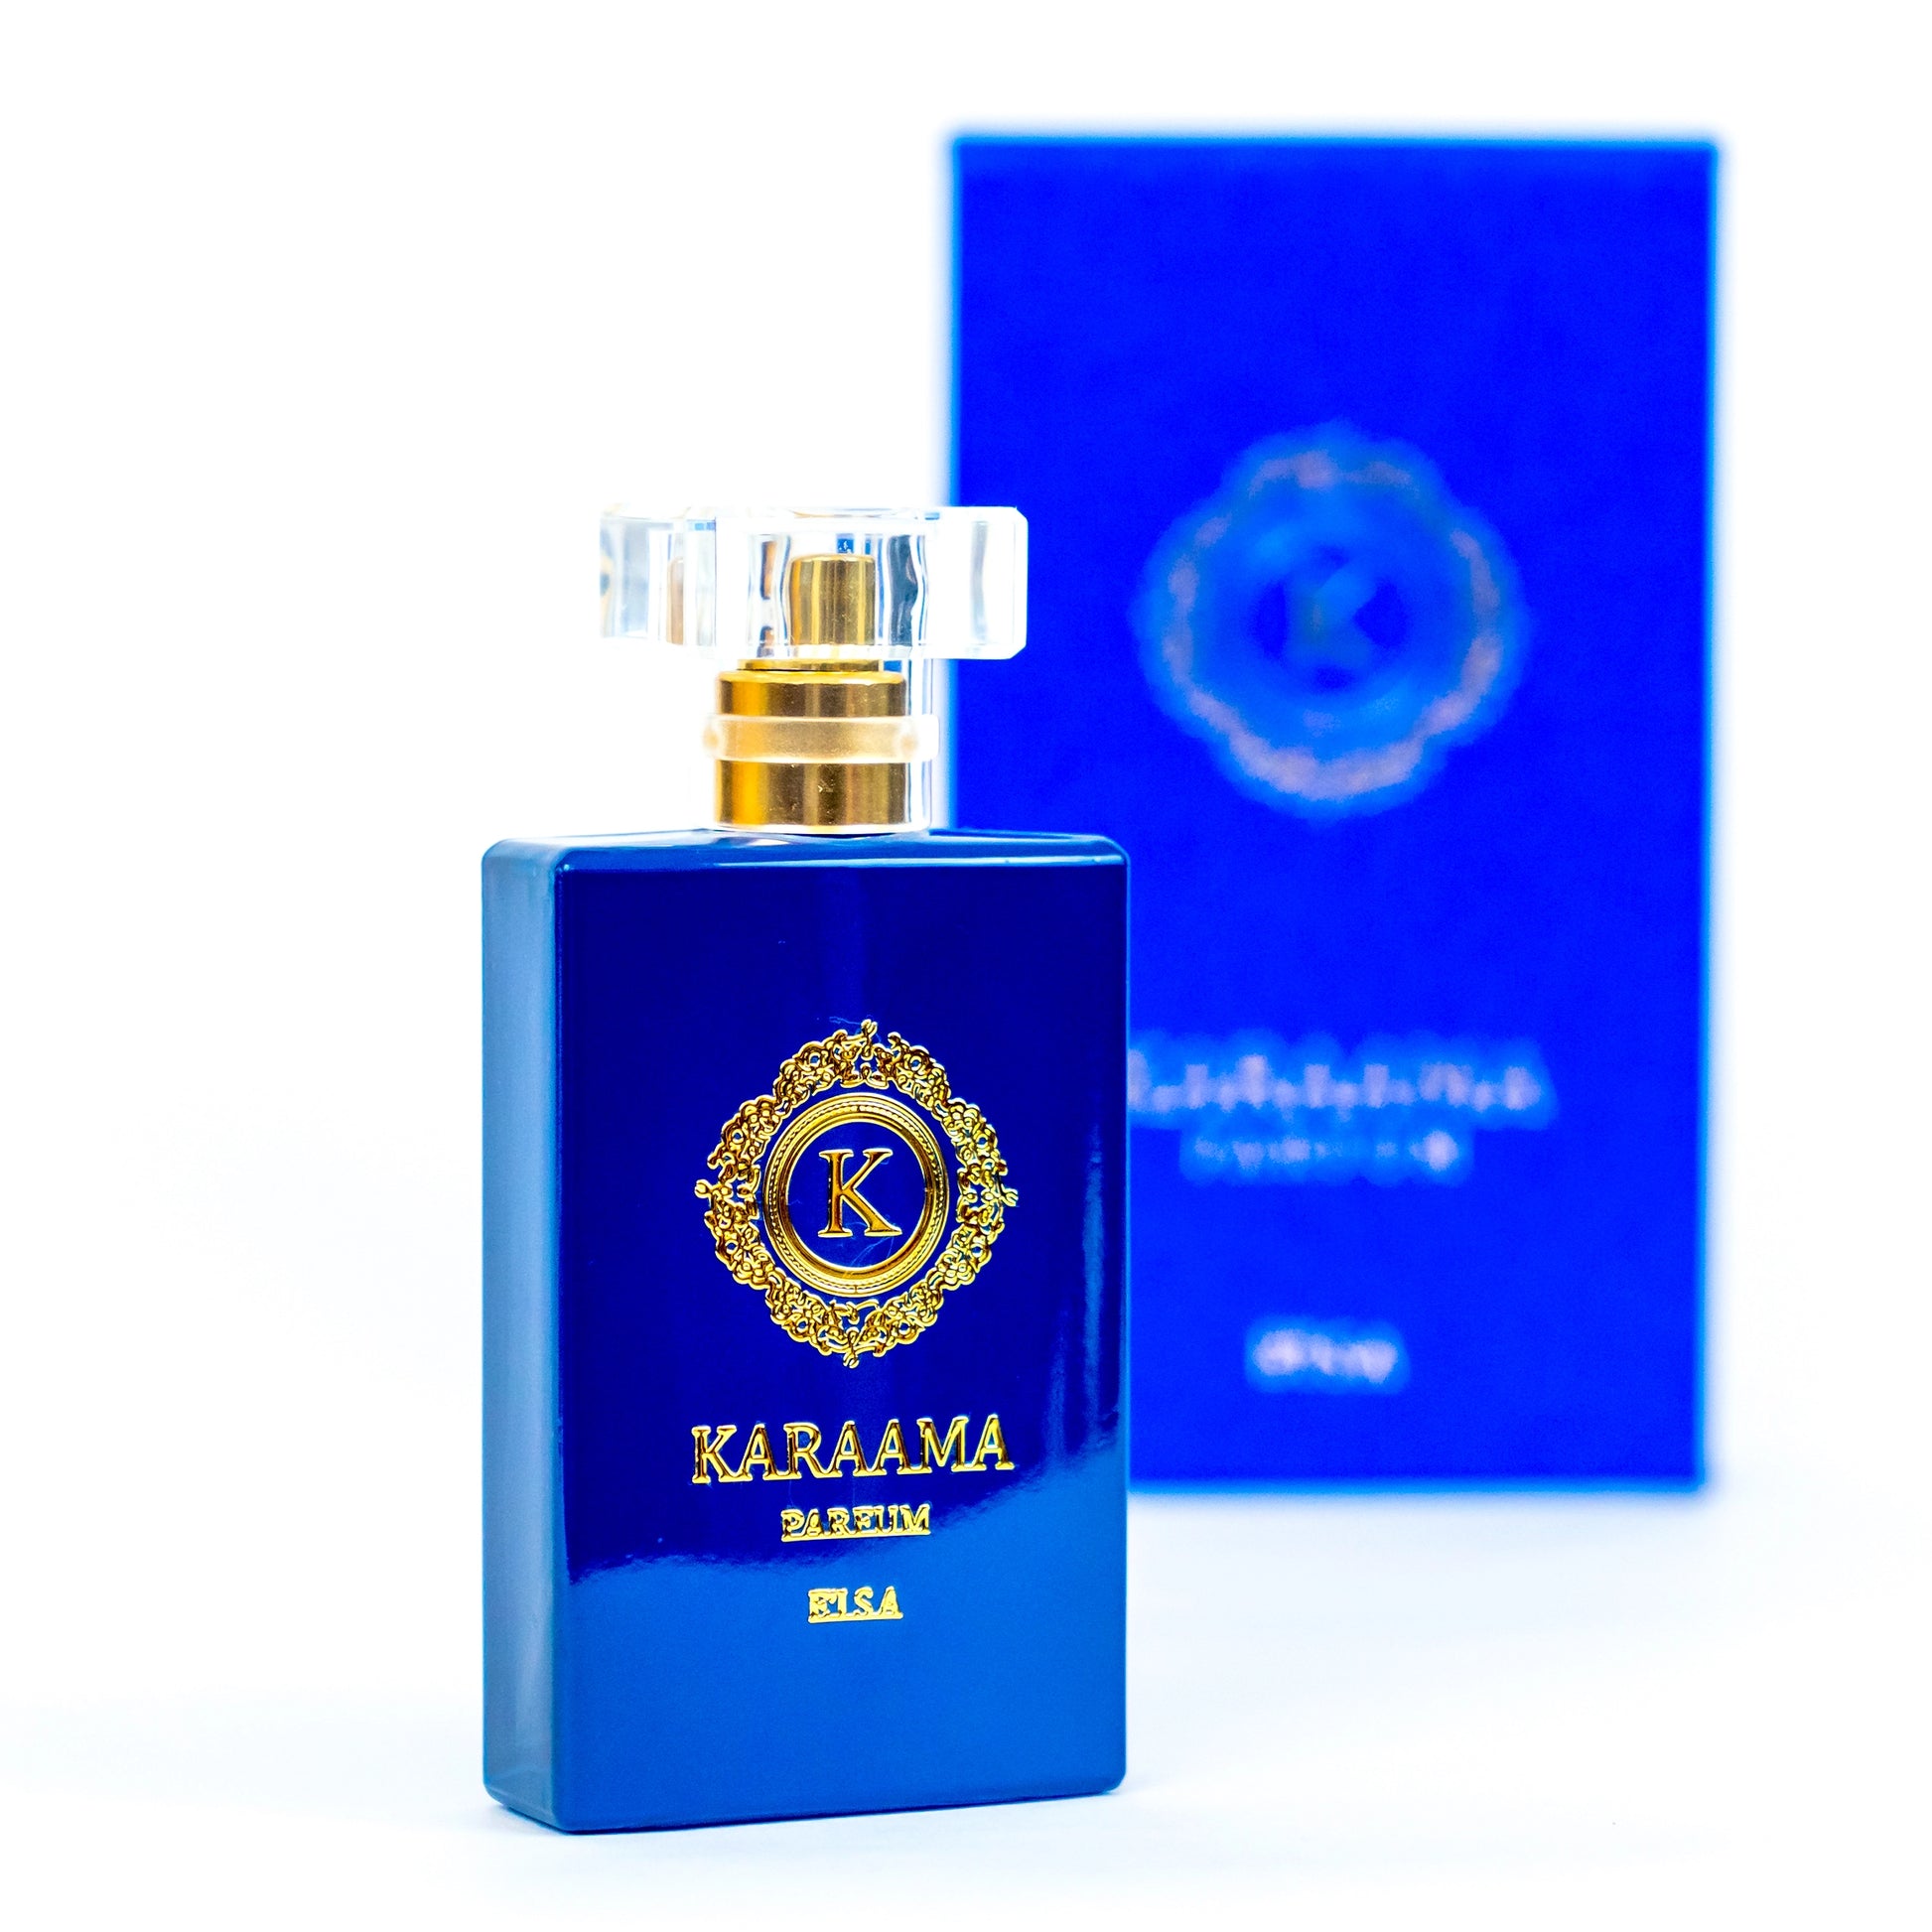 Elegant blue perfume bottle with intricate gold detailing, labeled KARAAMA, set against a matching box on a white background—a symbol of luxury and sophistication. #Perfume #LuxuryFragrance #Elegance #BeautyProduct #TrendingAccessories